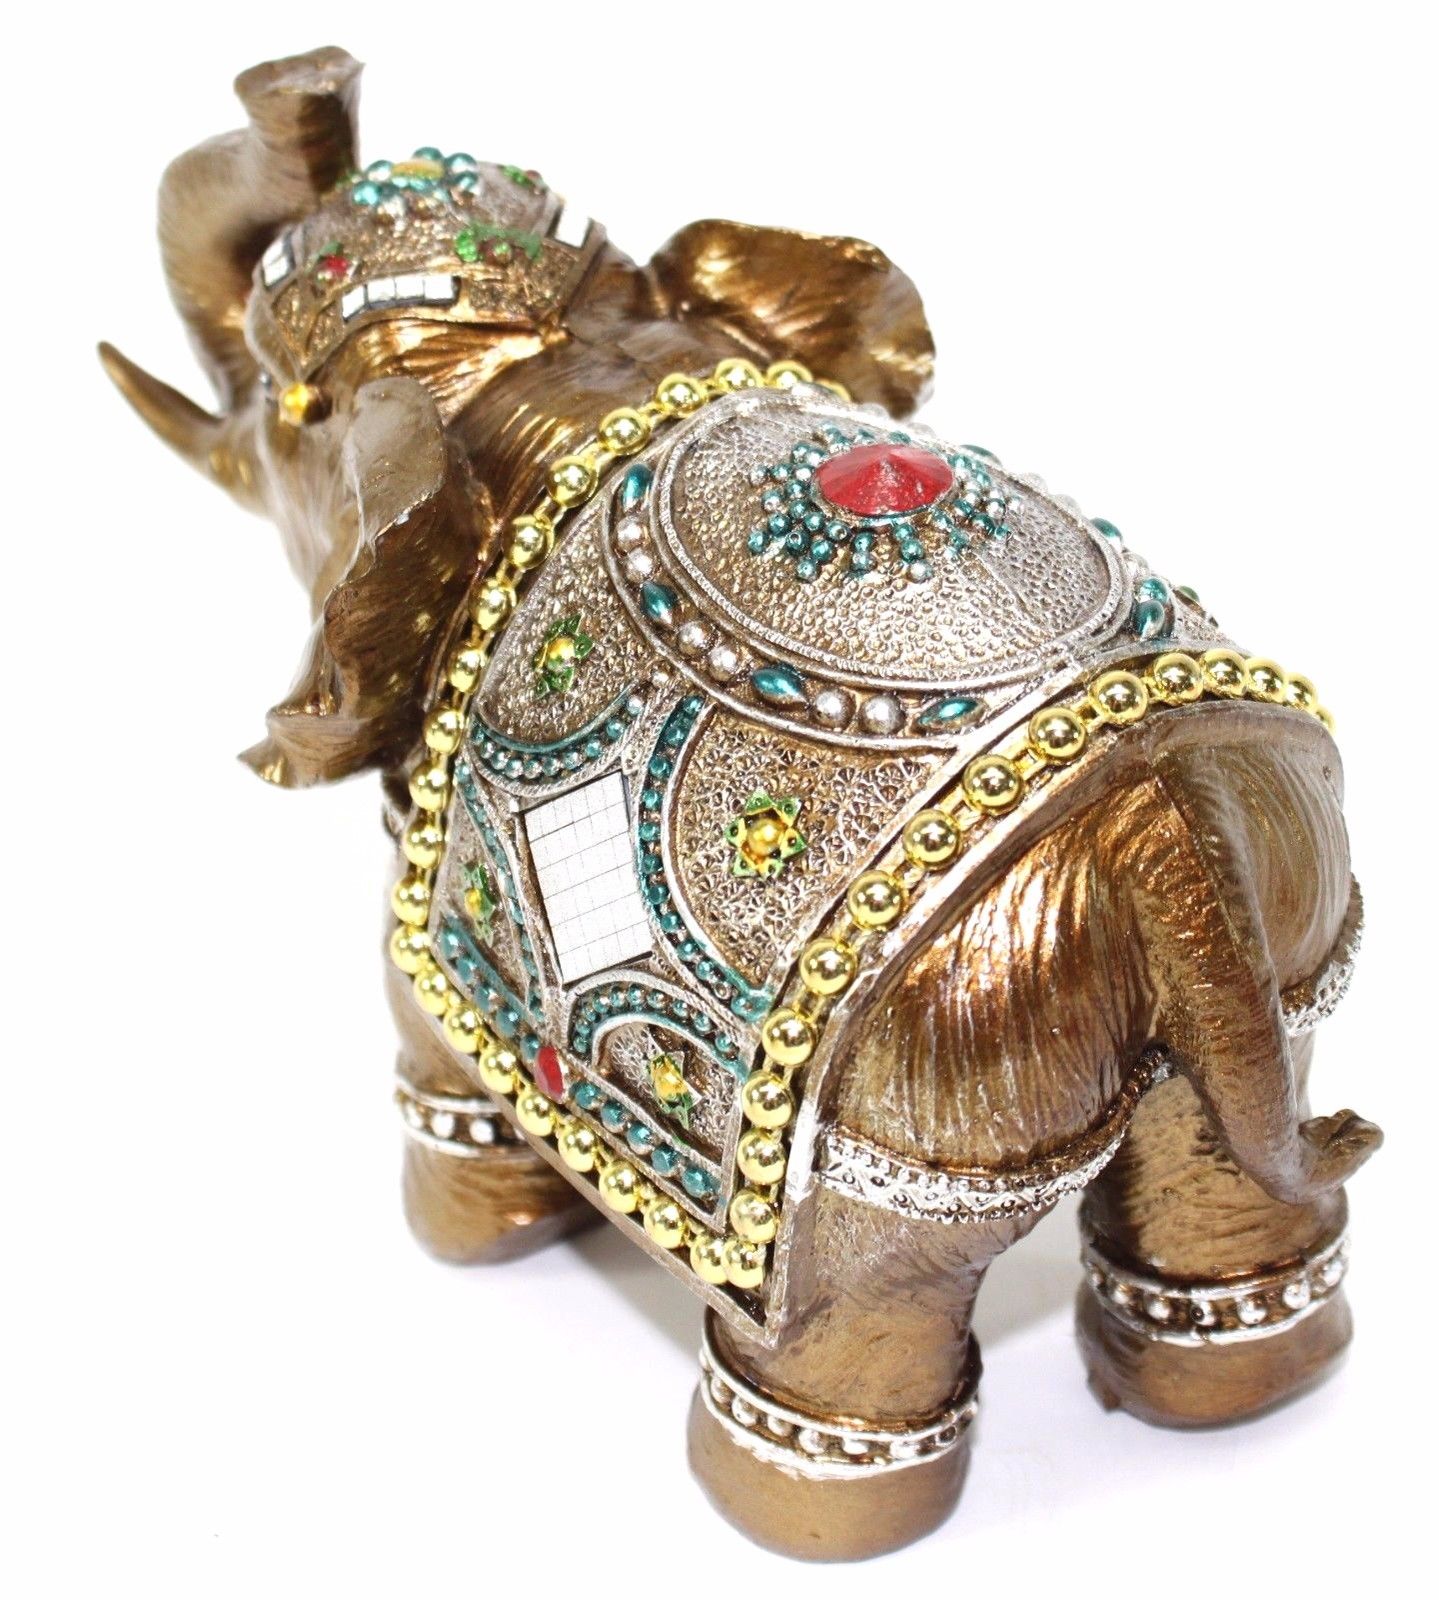 Feng Shui 7" Medium Gold Color Elegant Elephant Trunk Statue Lucky Figurine House Warming Gift & Home Decor - image 2 of 3